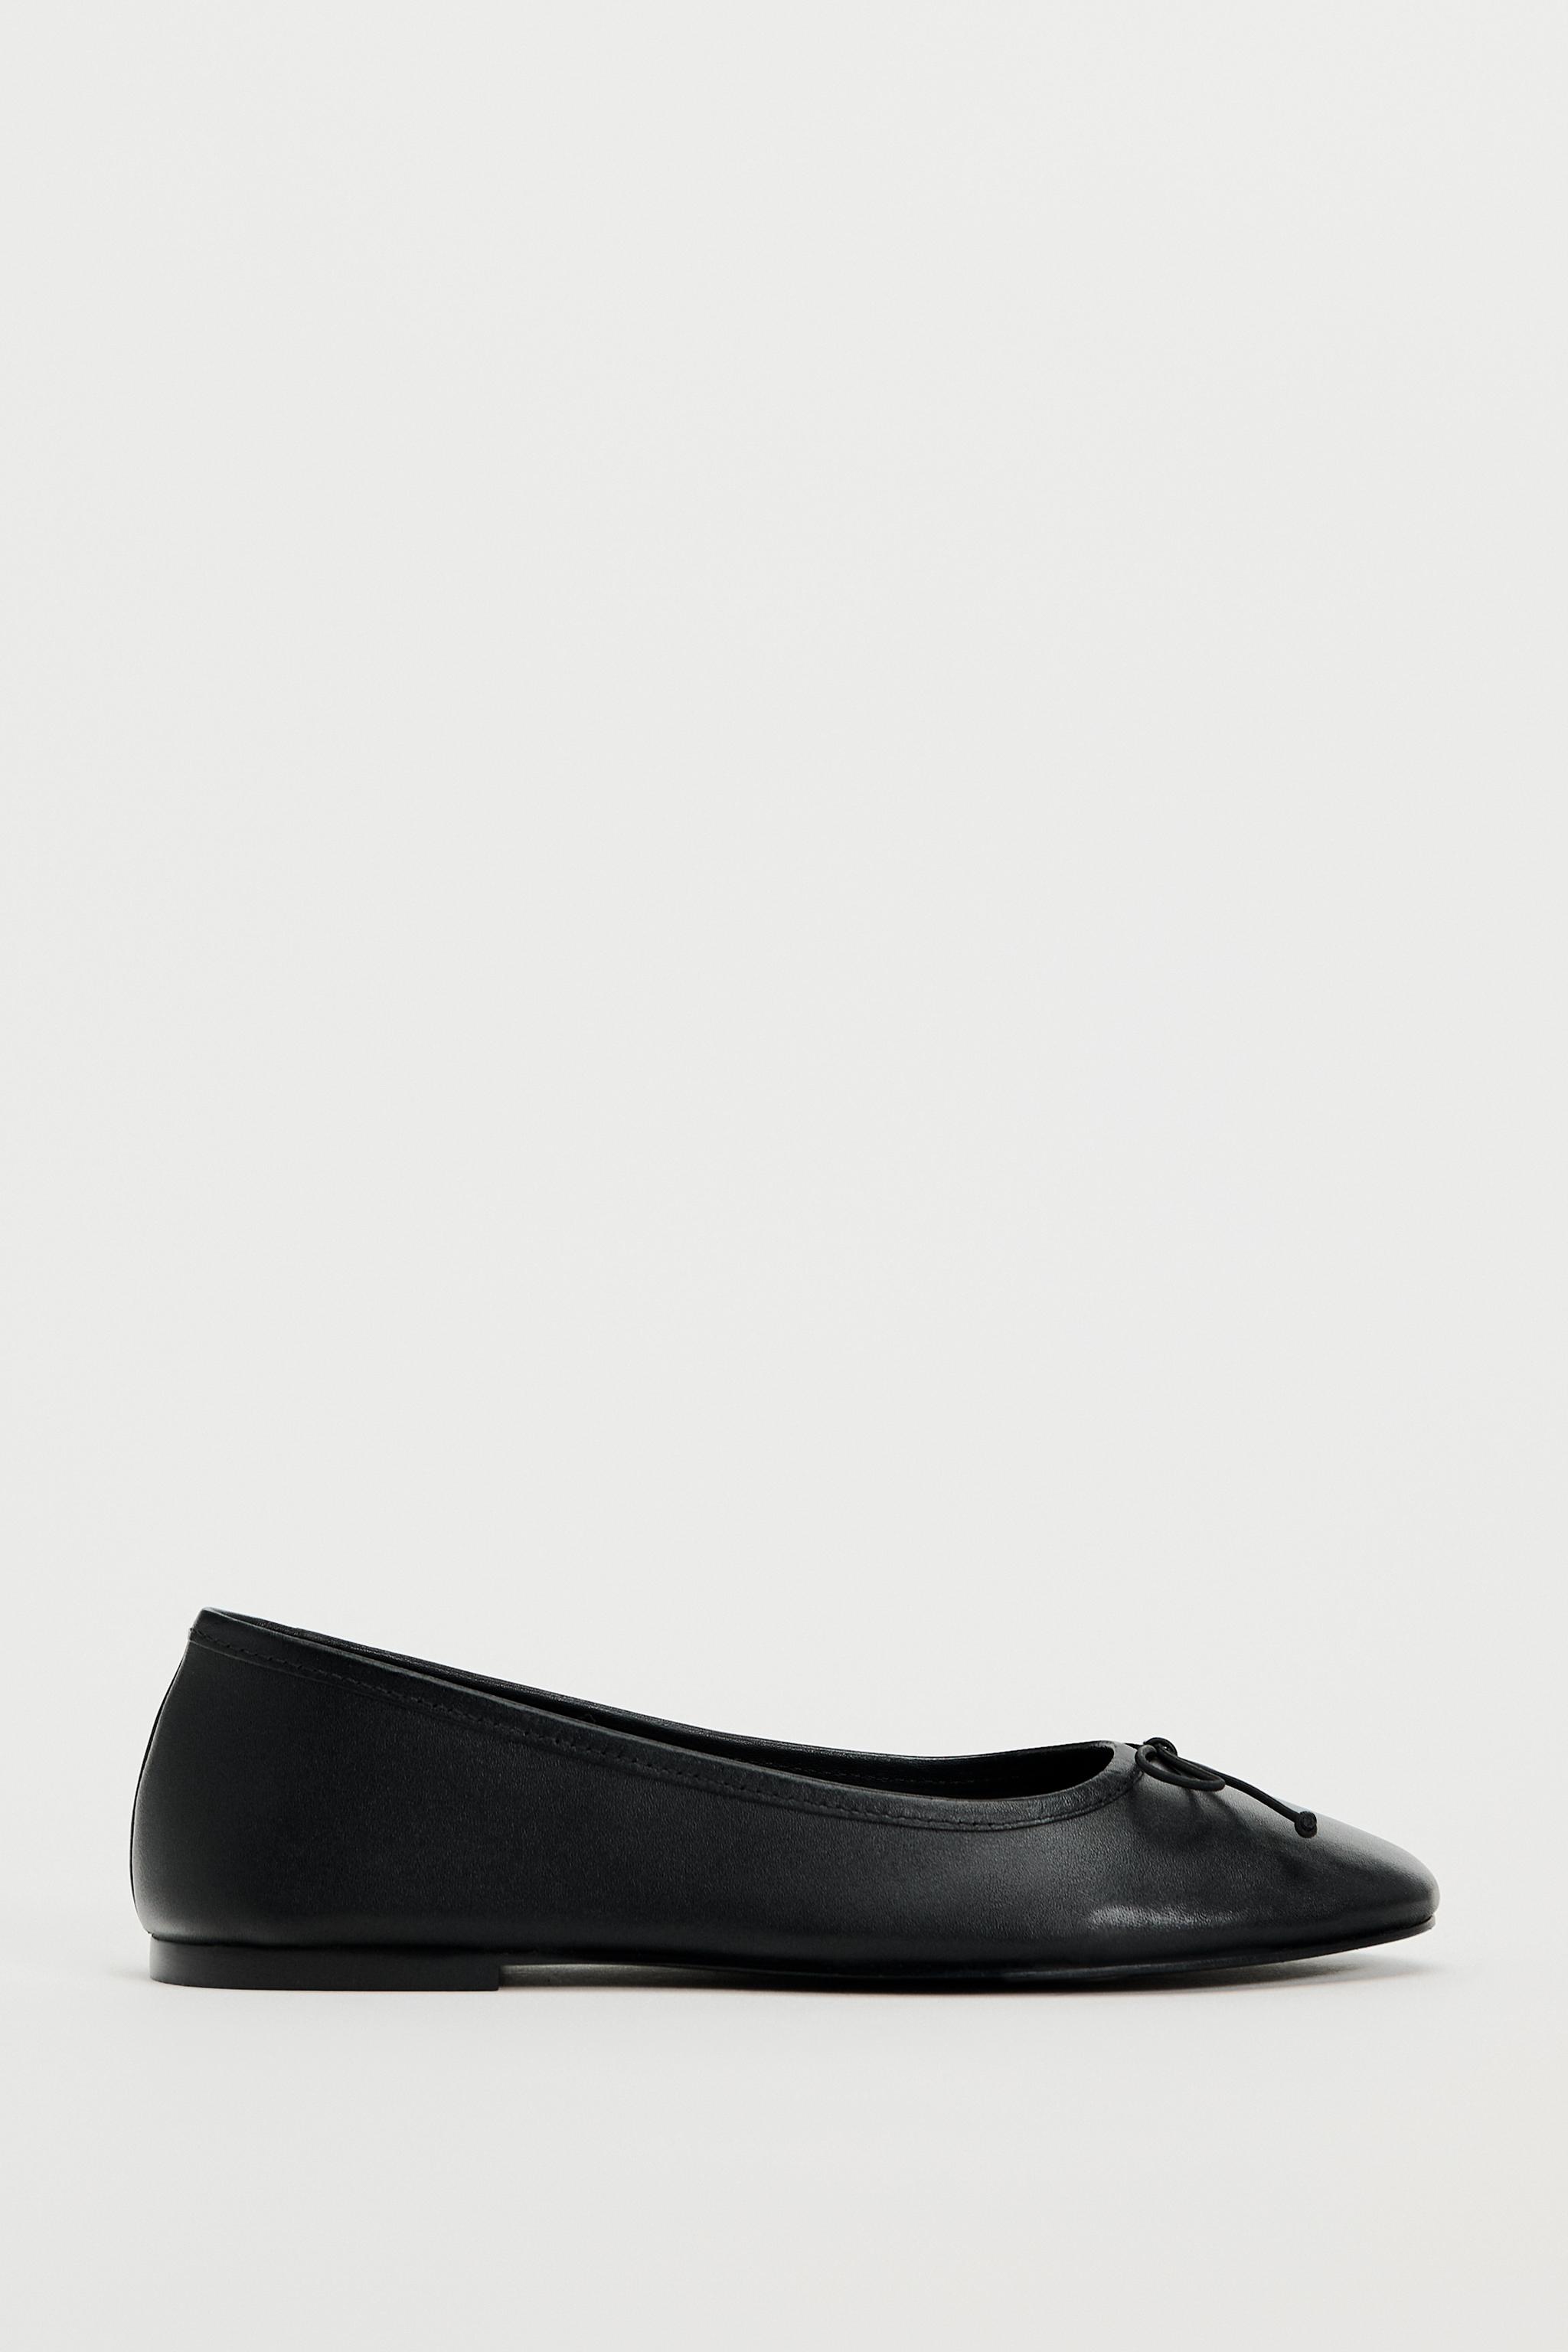 Flats Shoes Woman | ZARA United States - Page 4